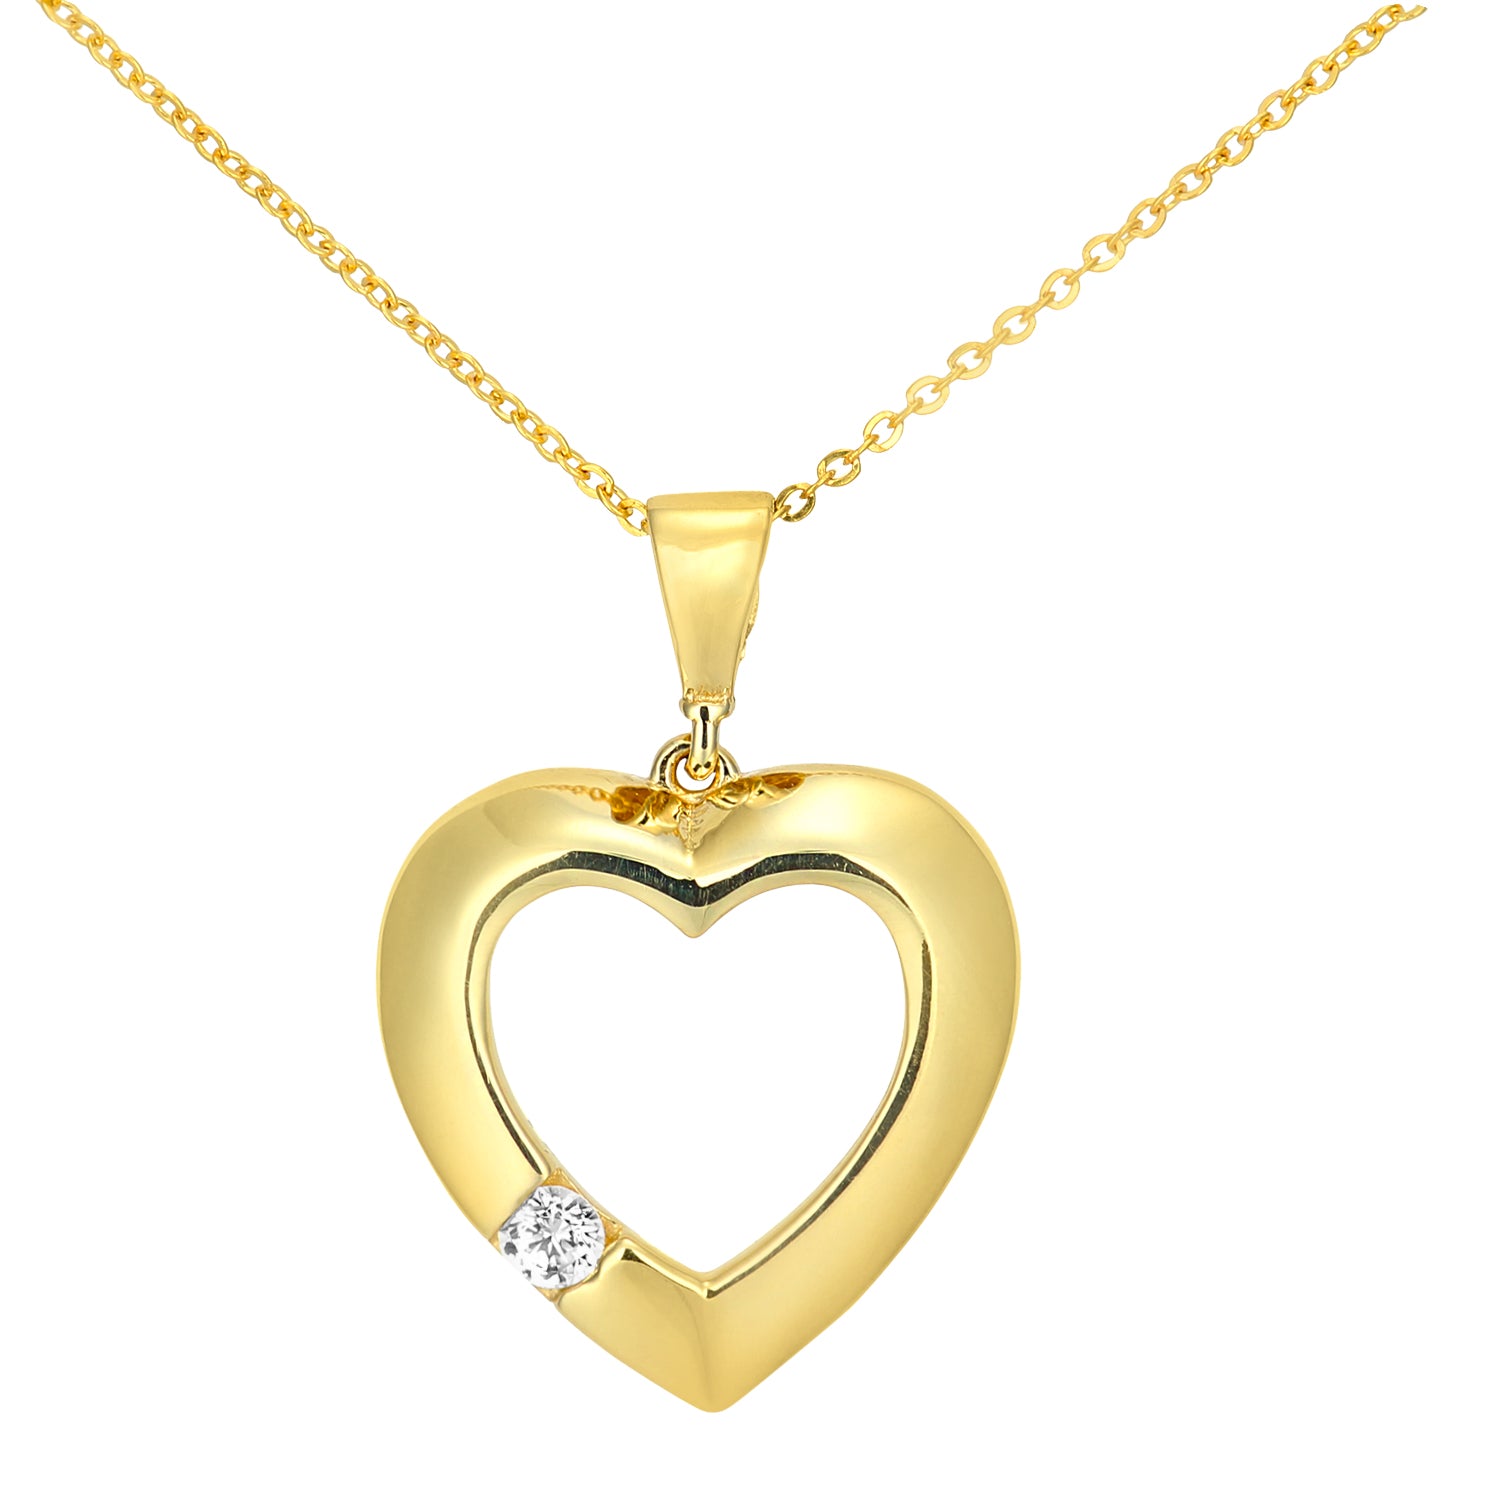 9 ct Yellow Gold Heart Pendant Necklace with a CZ Stone